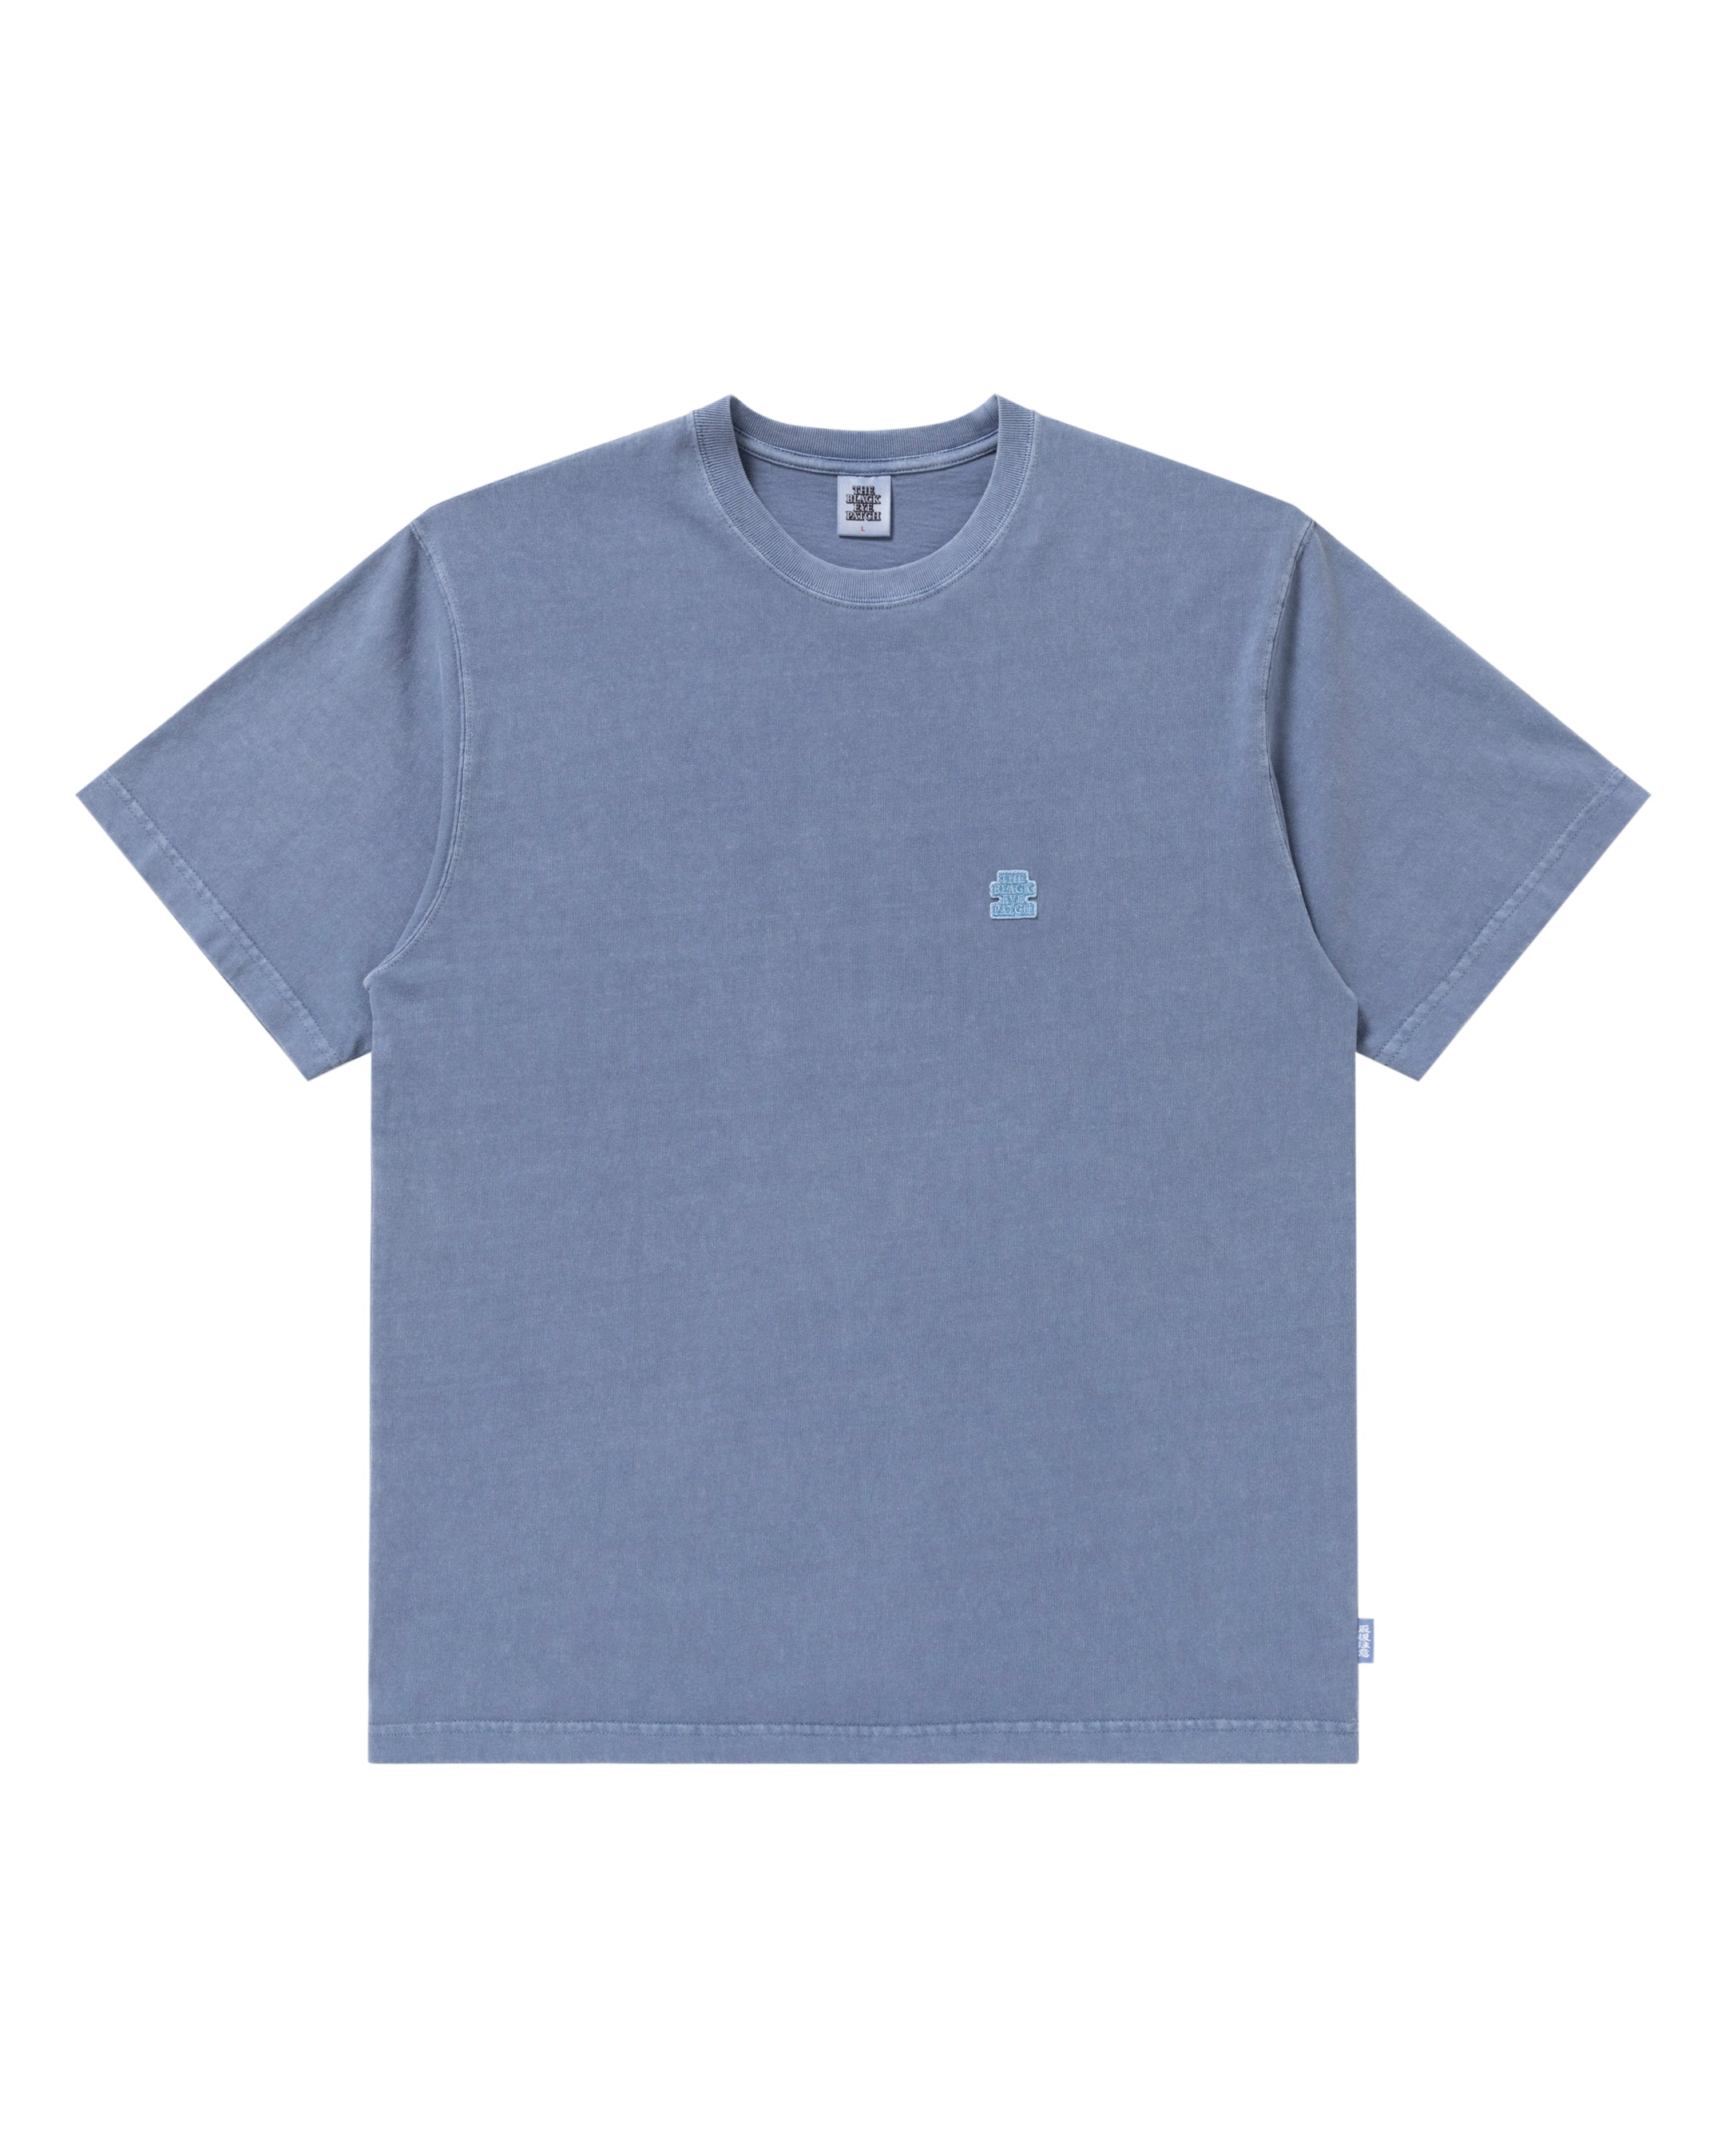 PIGMENT DYED SMALL OG LABEL TEE NAVY